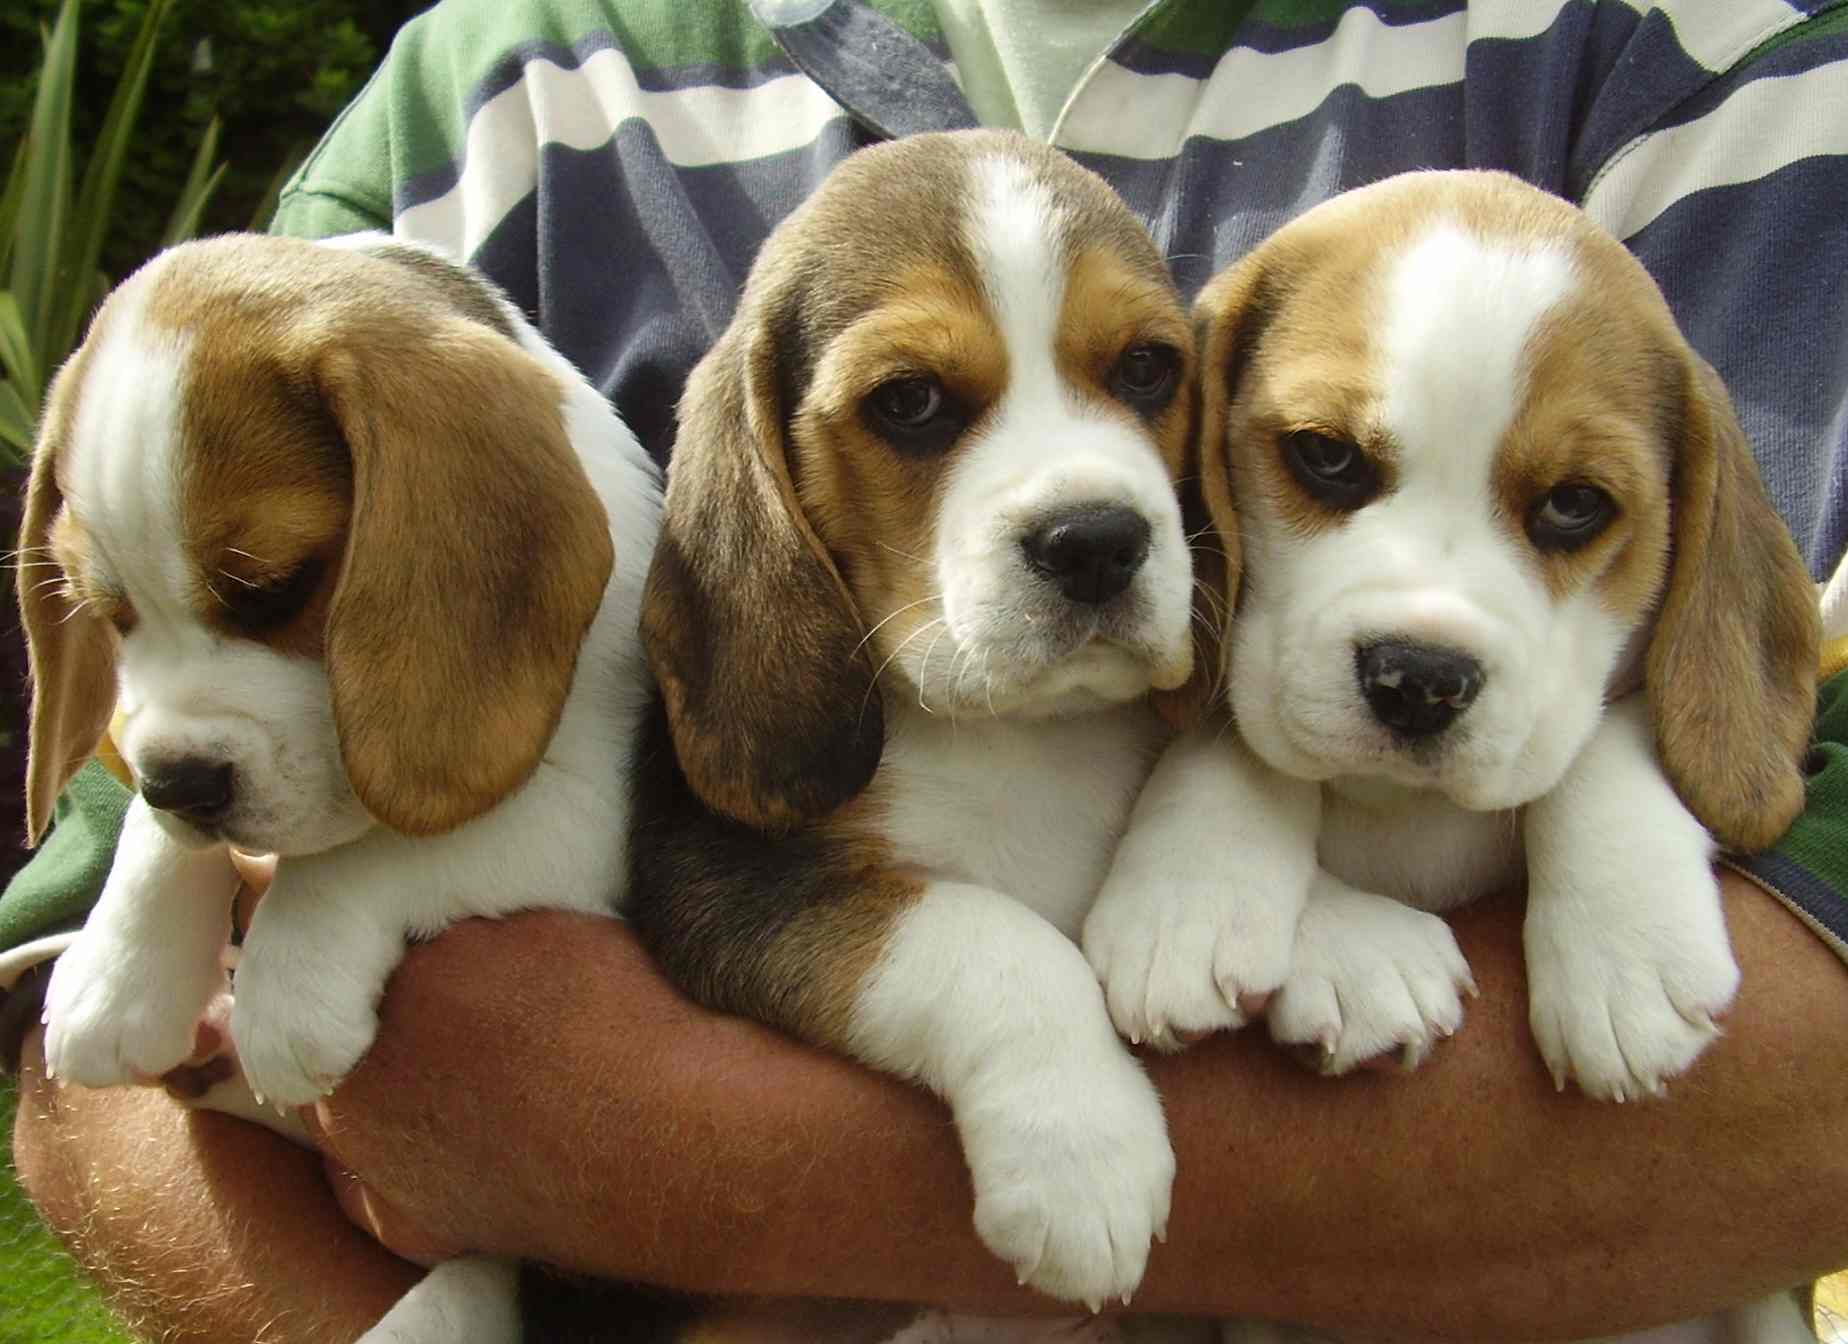 best image about Beagles. Puppy picture, Beagle